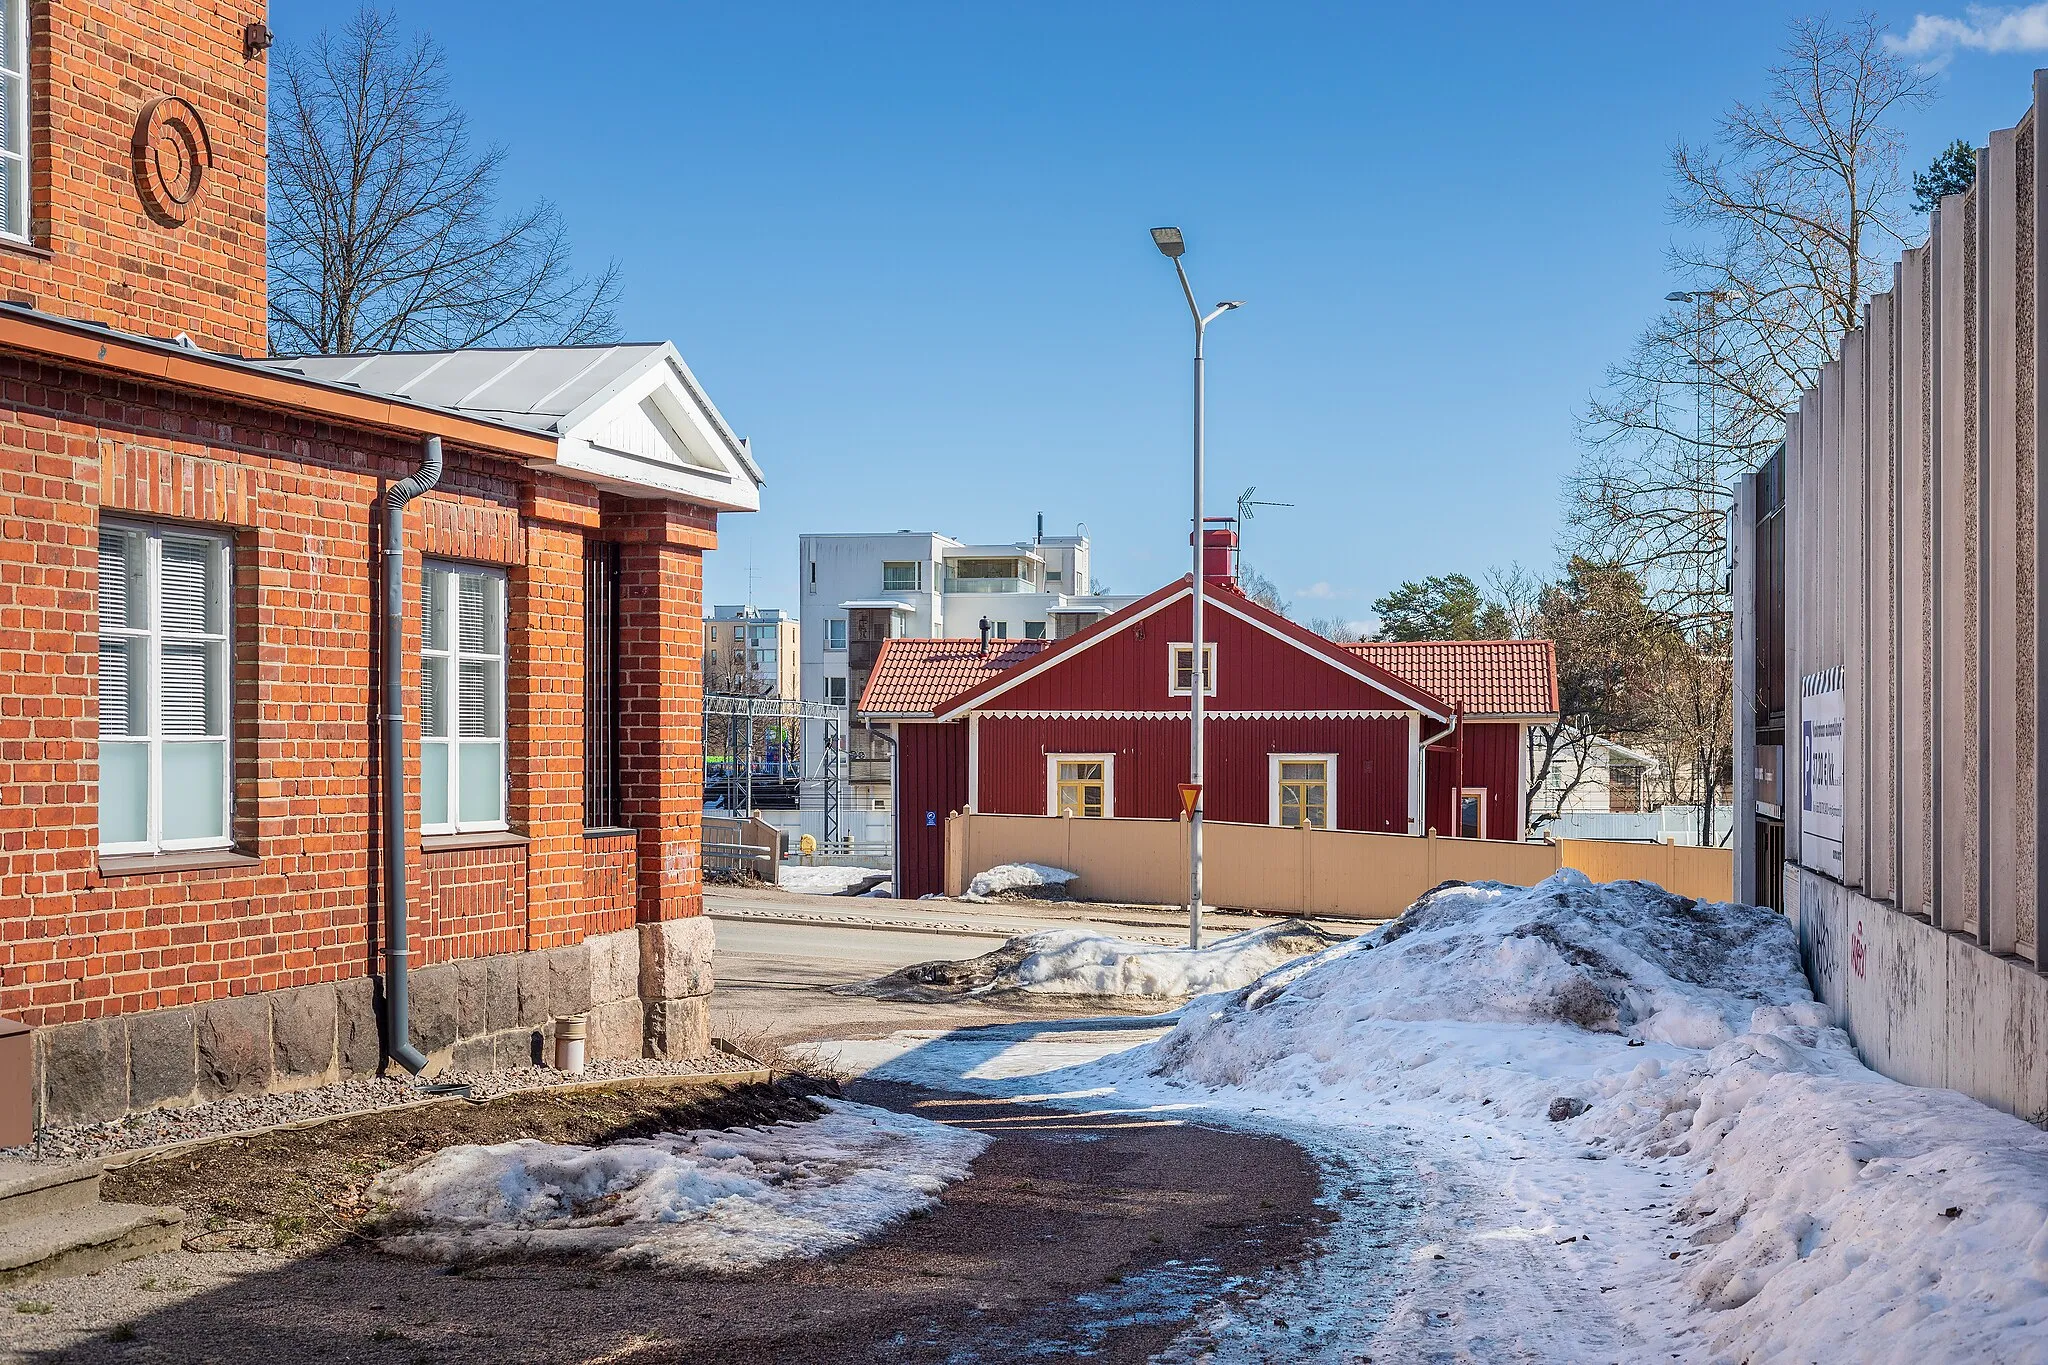 Photo showing: The wooden building of Asemantie 3, known as "Santarmien talo", as seen from a pedestrian path to the west in Kerava, Finland in 2022 April. The red tile building on the left is Sivistysvirasto (recently Kiinteistö Oy Nikkarinkruunu). Sivistysvirasto is estimated to be from 1923. Asematie 3 is estimated having been built in 1897.